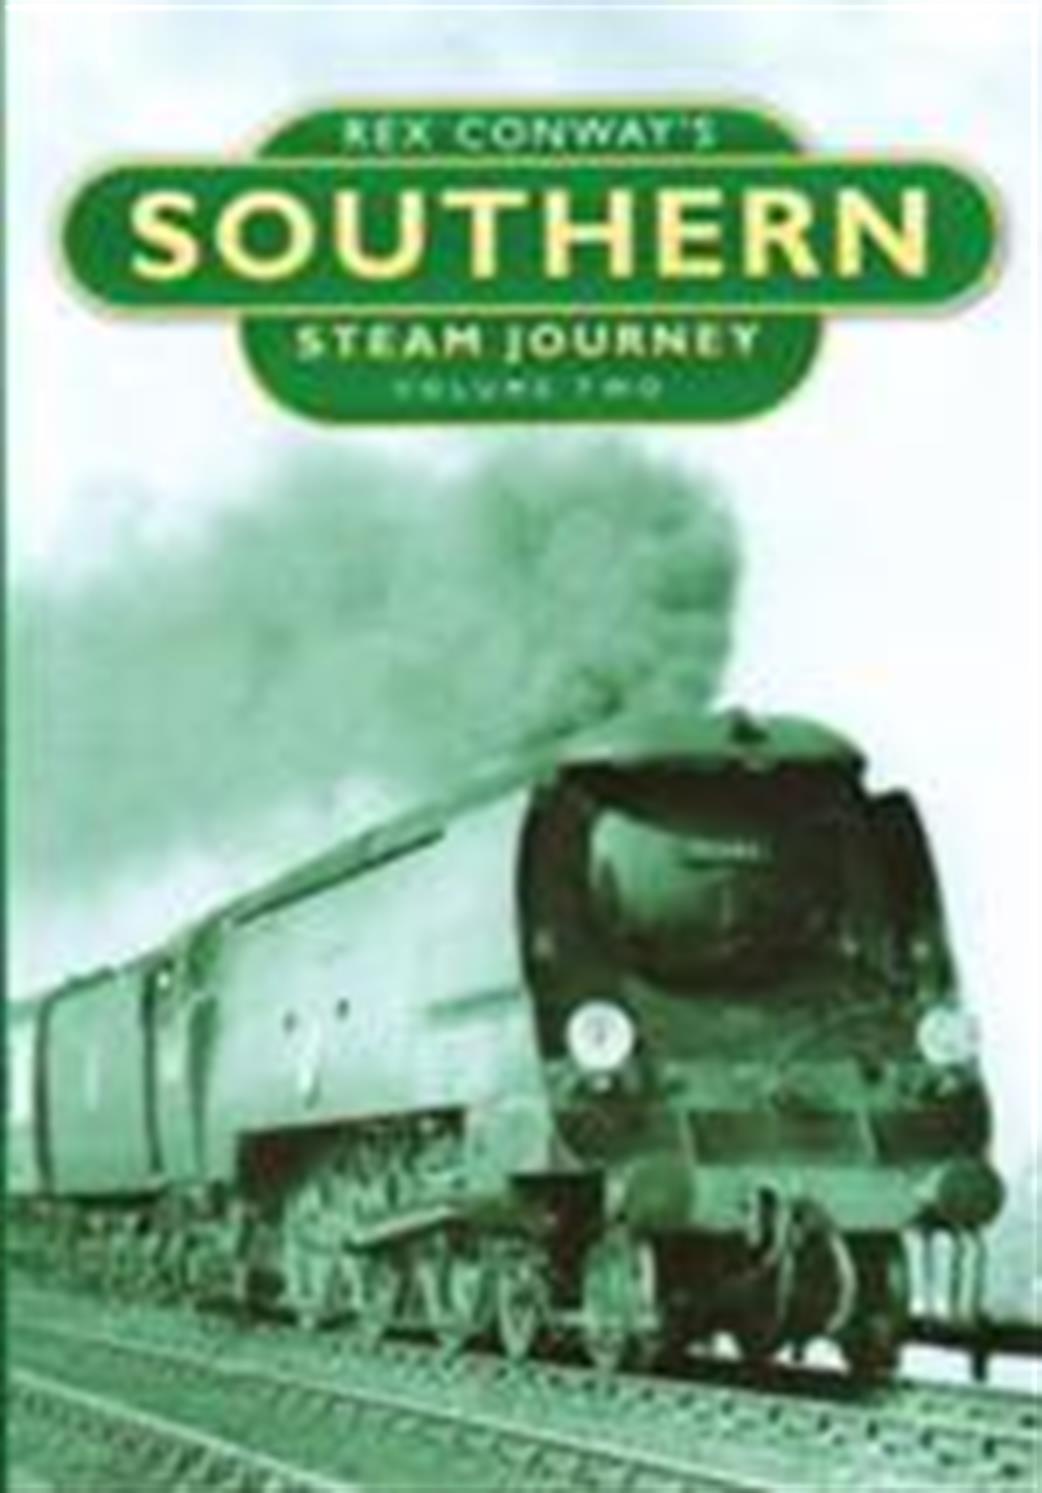 History Press  9780752457581 Southern Steam Journey Volume 2 By Rex Conway